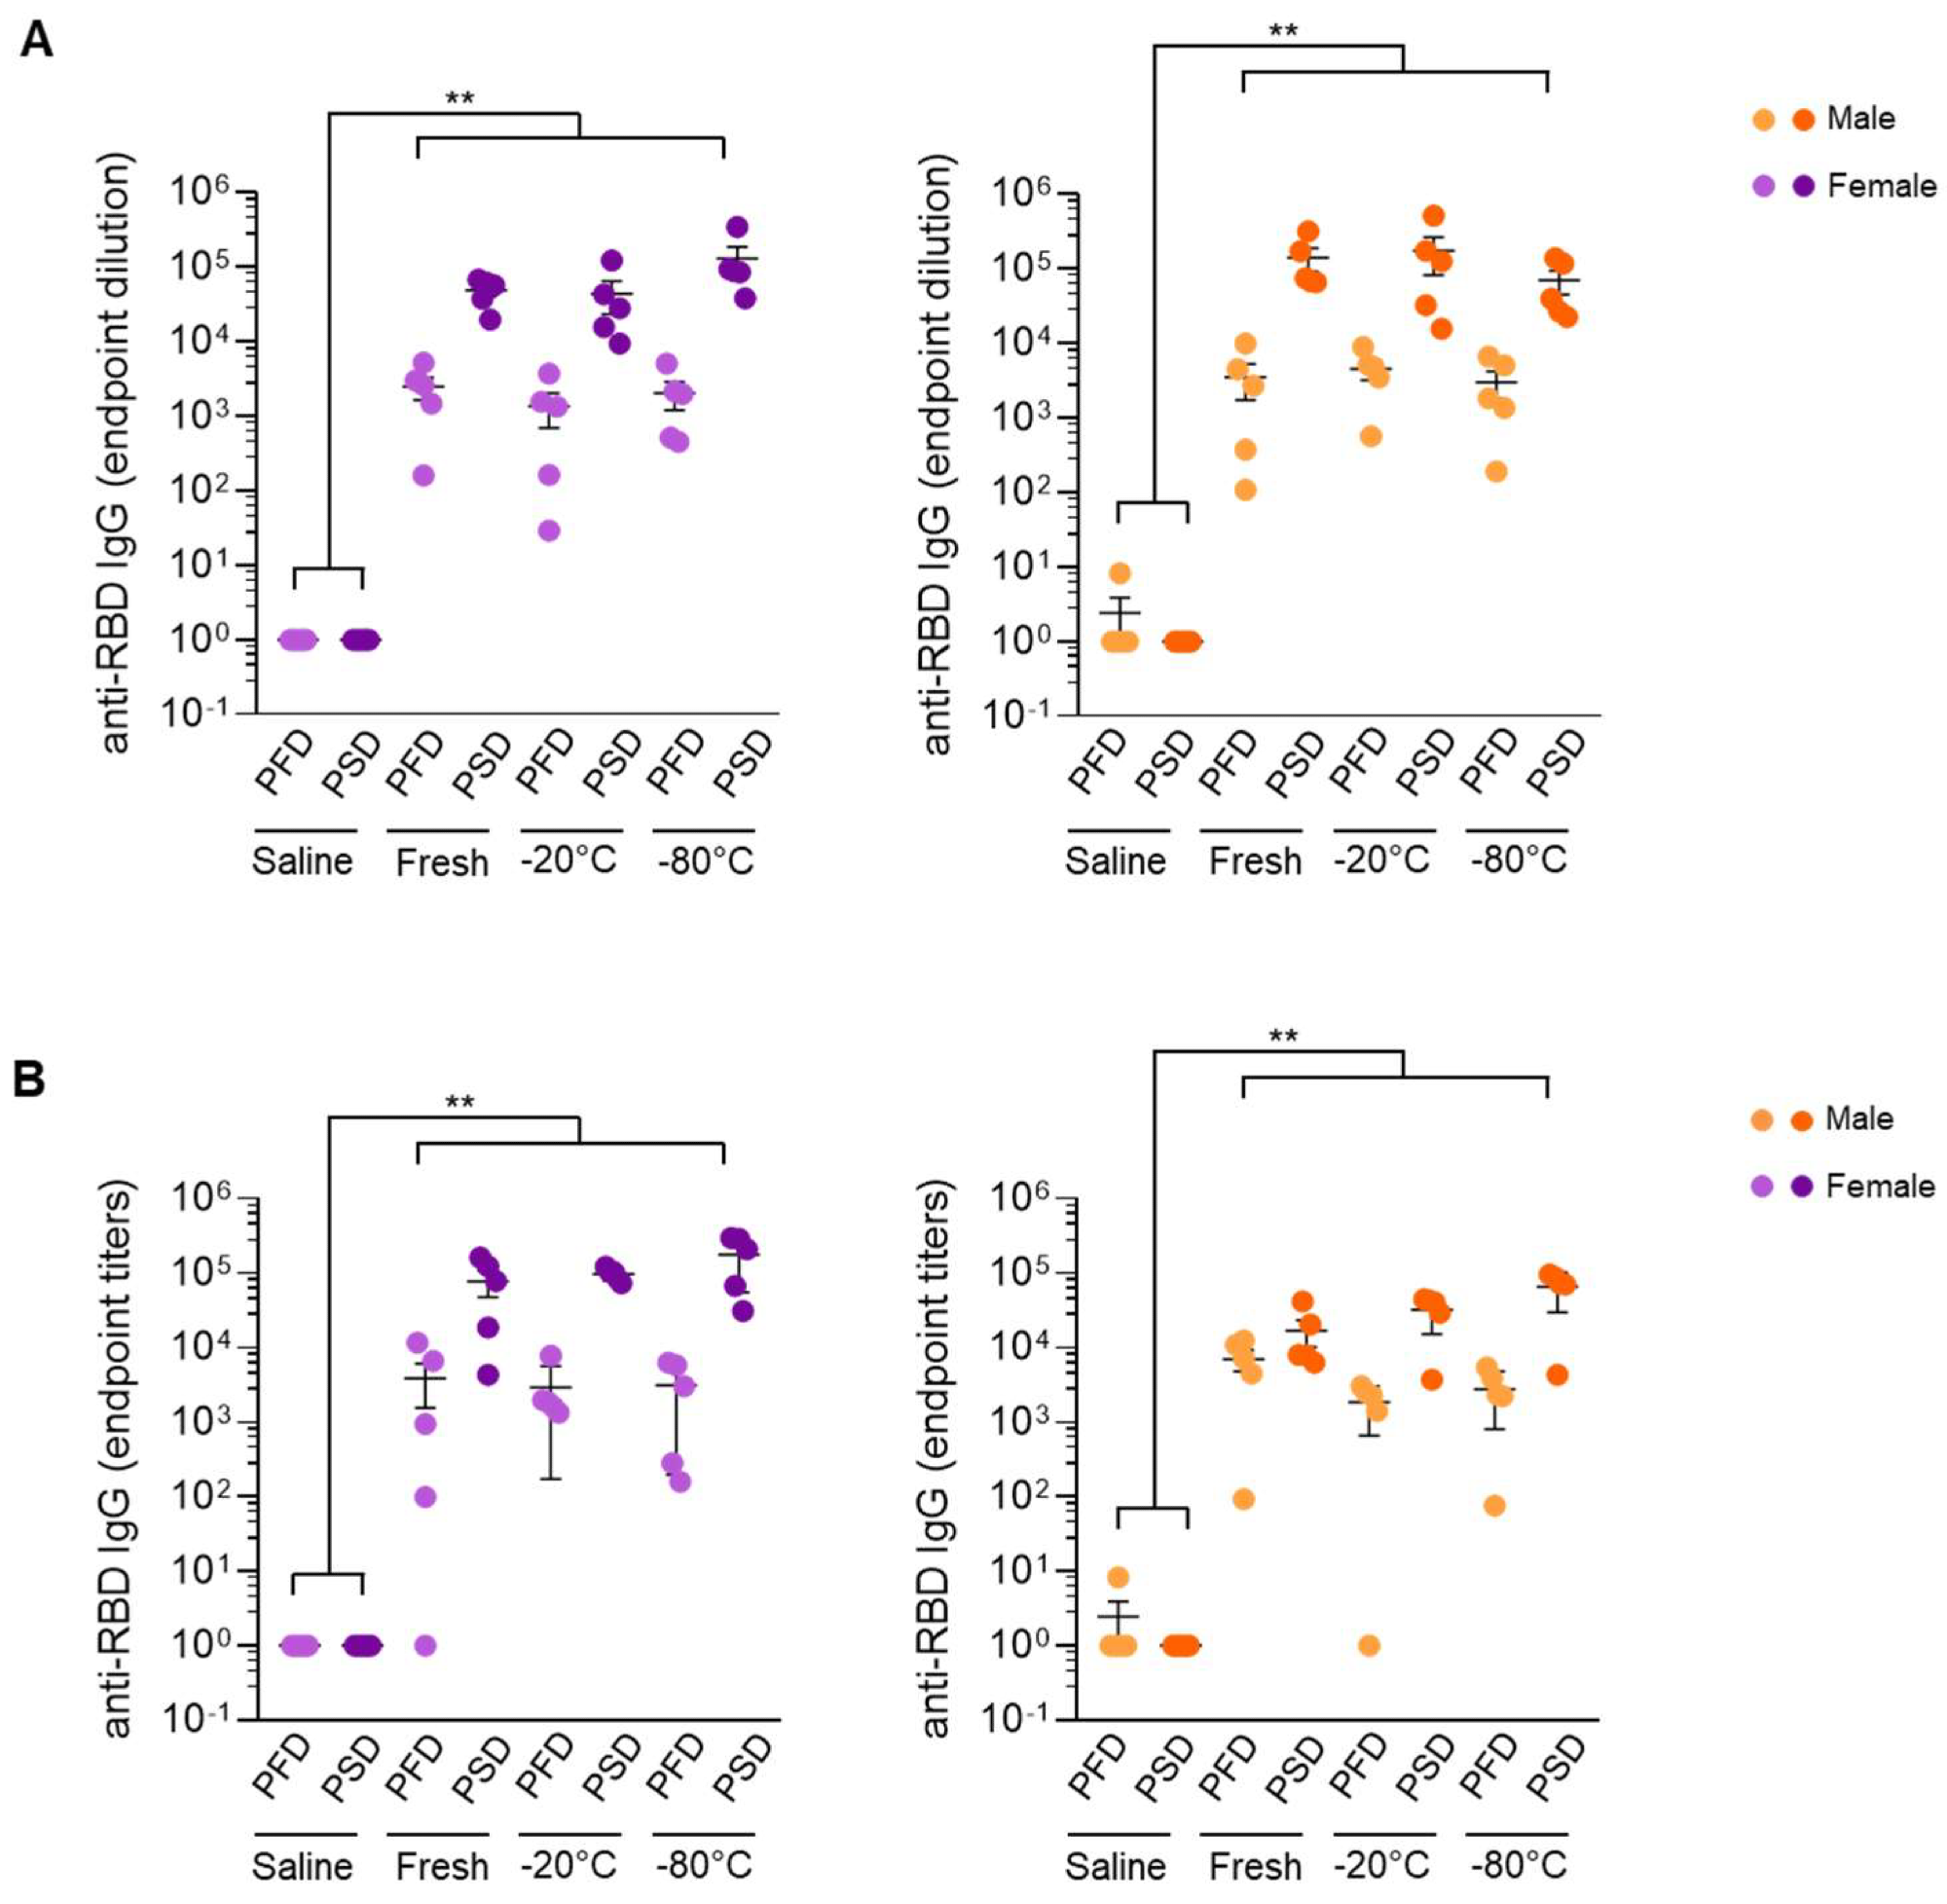 mRNA vaccines under different handling and re-freezing conditions induced similar responses in male and female mice. SARS-CoV-2 Spike RBD-specific IgG end-point titers of mice immunized with Comirnaty® (Pfizer-BioNTech) vaccine (A) or Spikevax® Moderna vaccine (B) post-prime and post-boost immunization. Sera from control mice inoculated with PBS were used to establish negative threshold values defined as the mean plus 4 times the standard deviation of the mean. Bars represent mean ± standard error mean (SEM). Dashed line indicates negative threshold. Data are presented as individual dots. Two-tailed Mann–Whitney U test was performed to compare vaccine treatment groups (saline, fresh, −20 °C, and −80 °C) (** p < 0.01). For each time point and condition, n = 5.